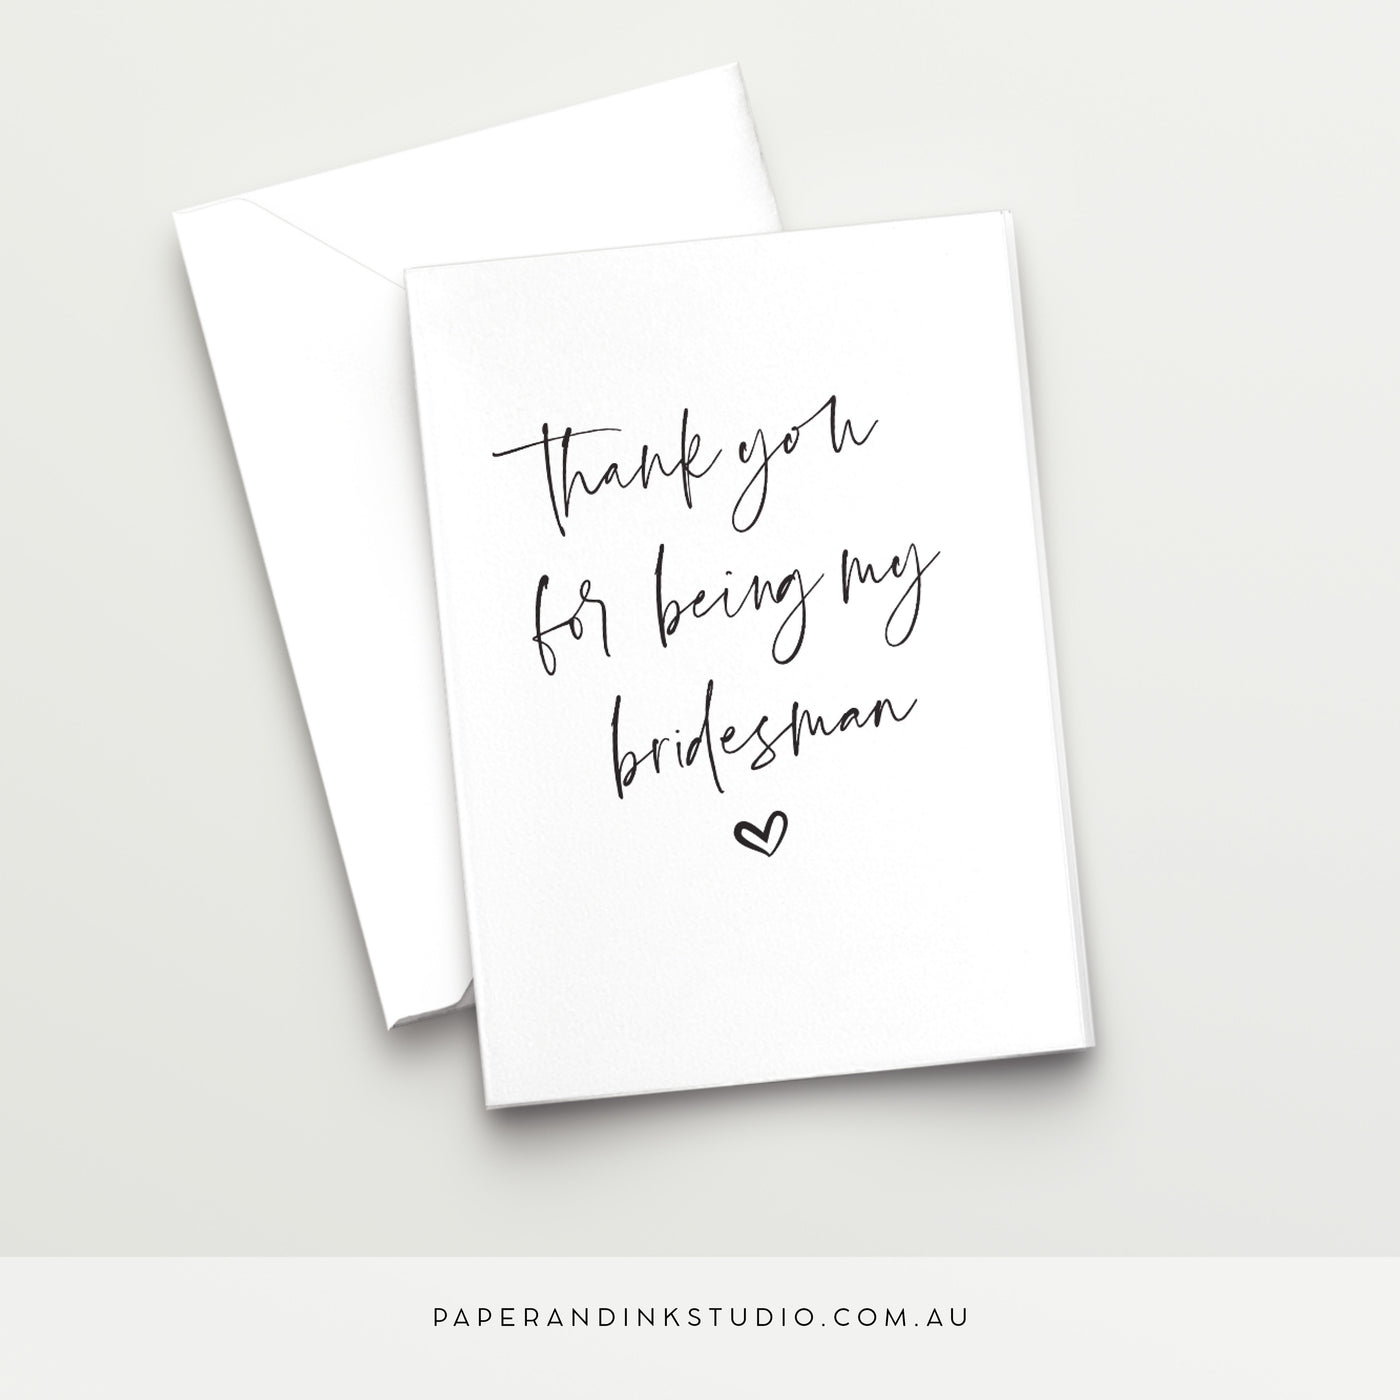 A white folded wedding card in a design called Thorne with black writing that says thank you for being my bridesman, to give to your bridesman on or after your wedding day.